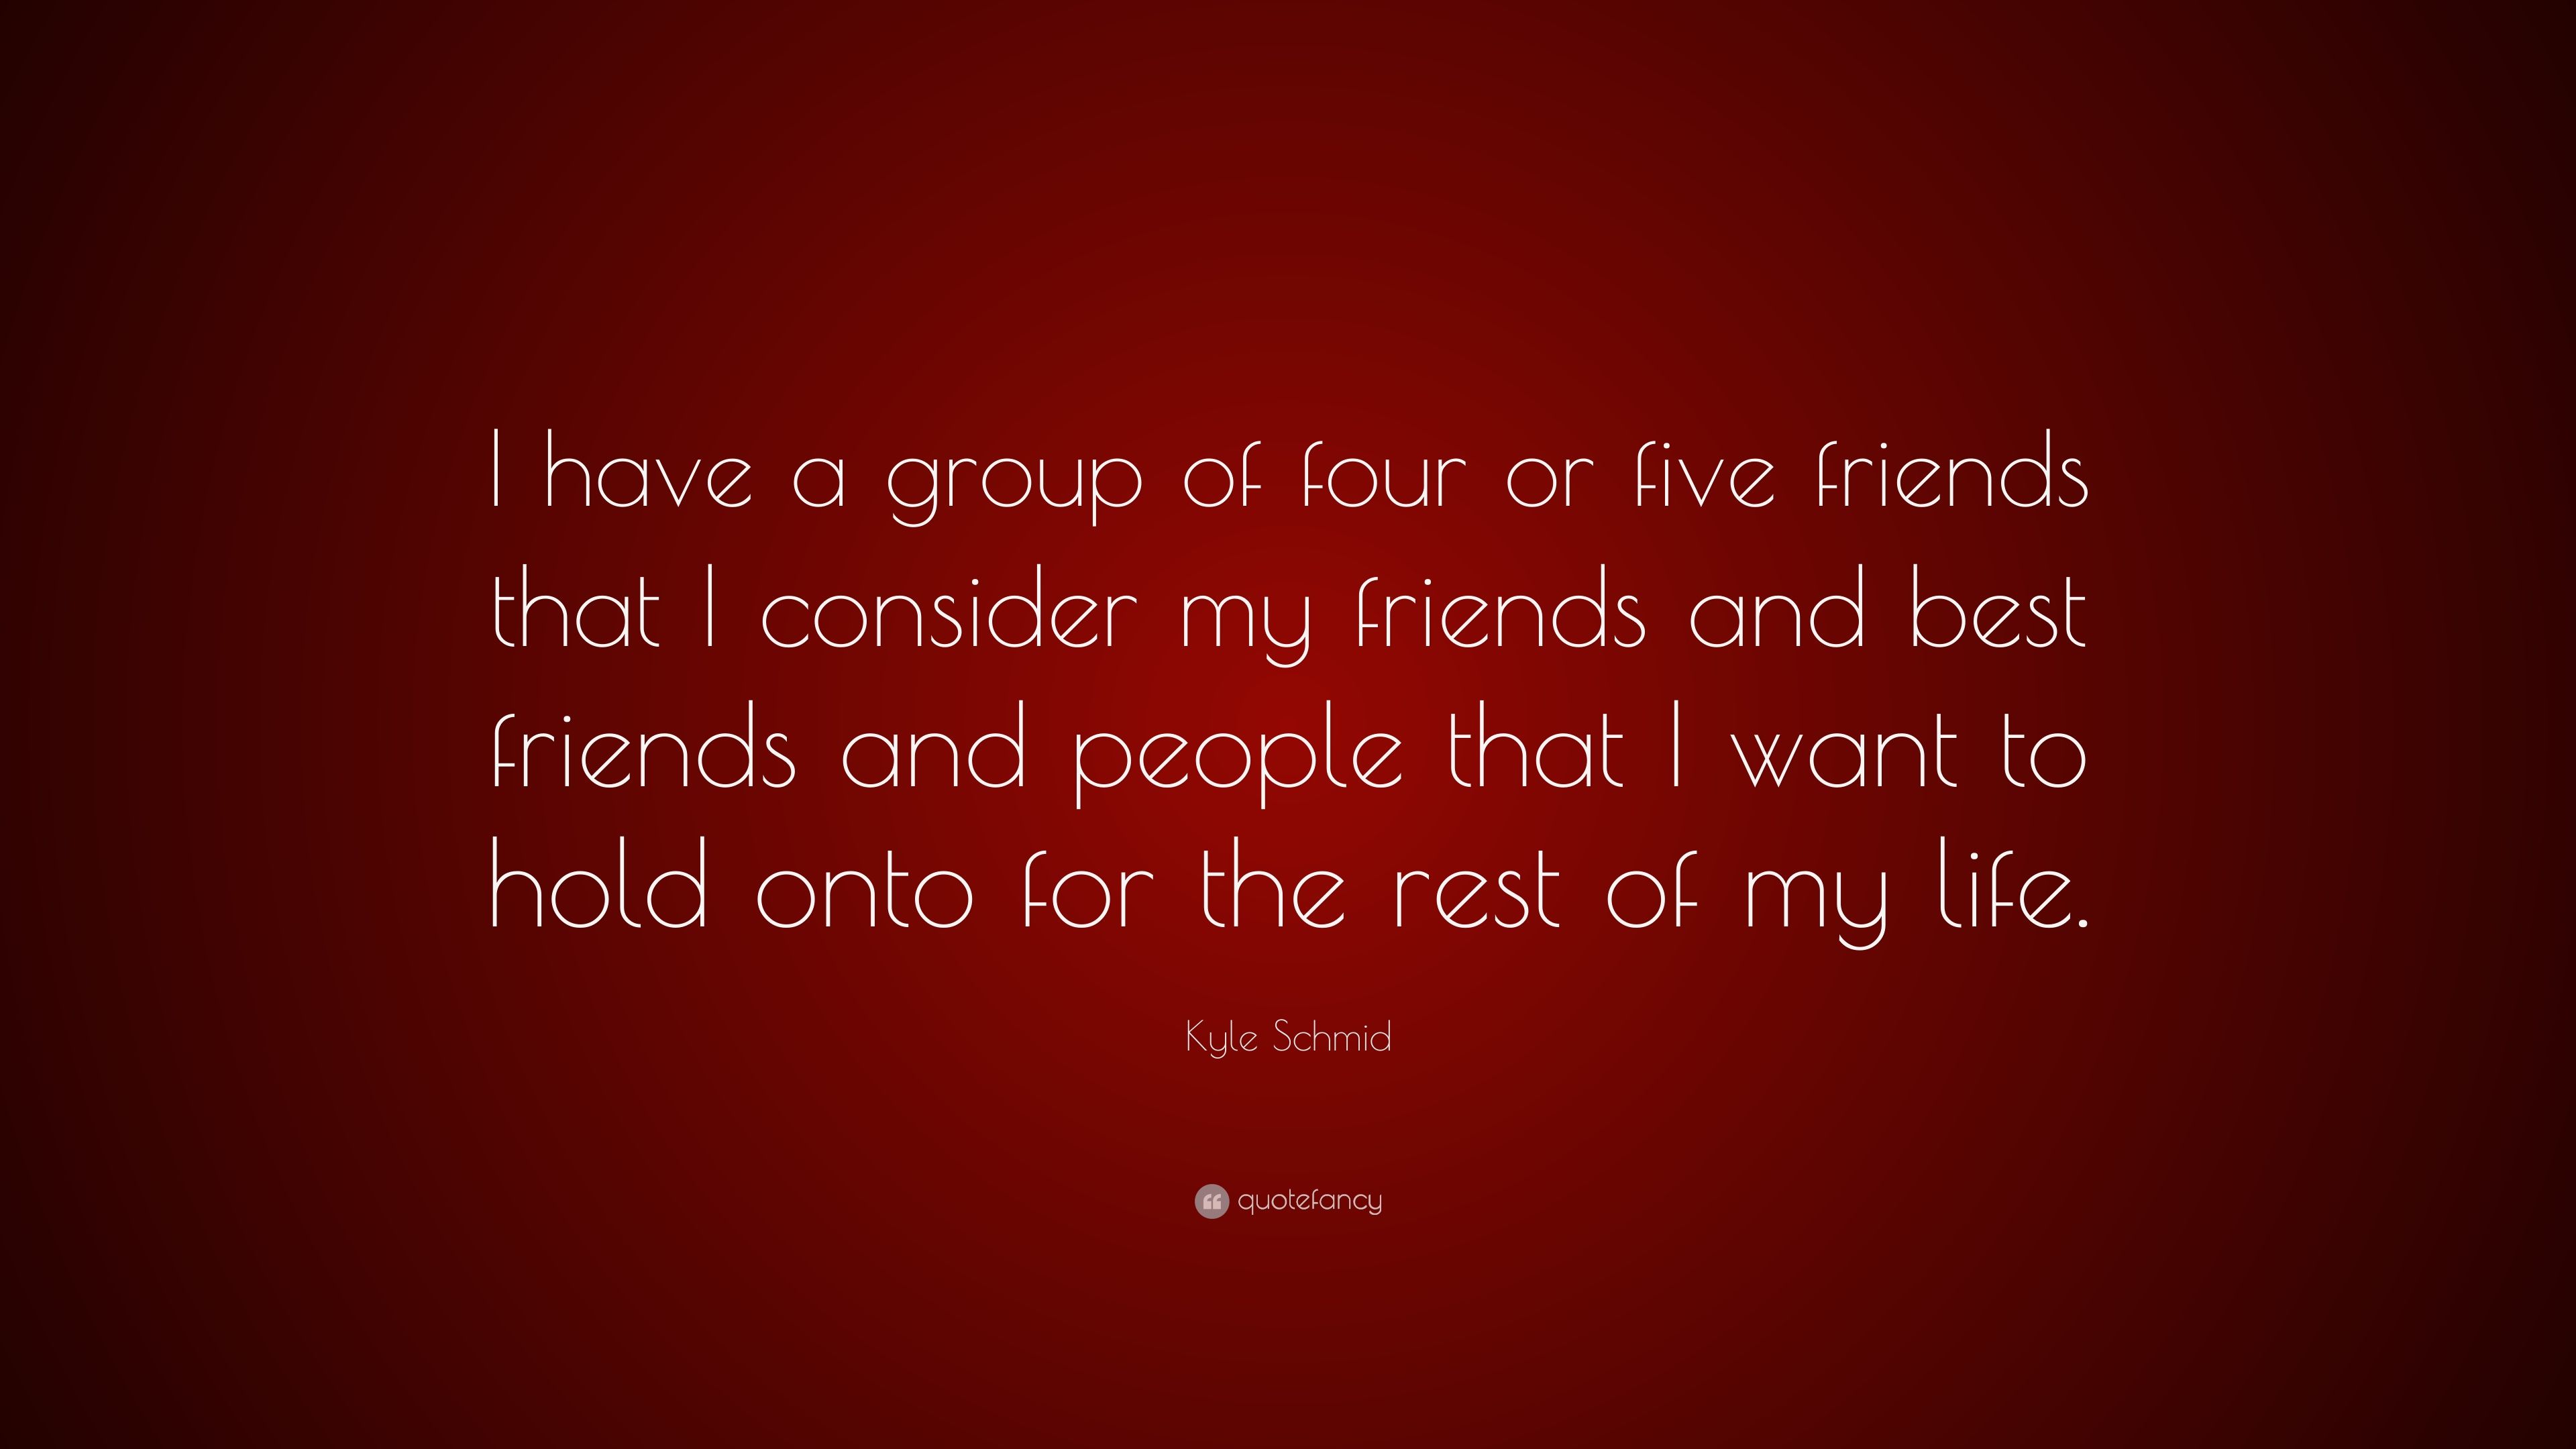 Kyle Schmid Quote: “I have a group of four or five friends that I